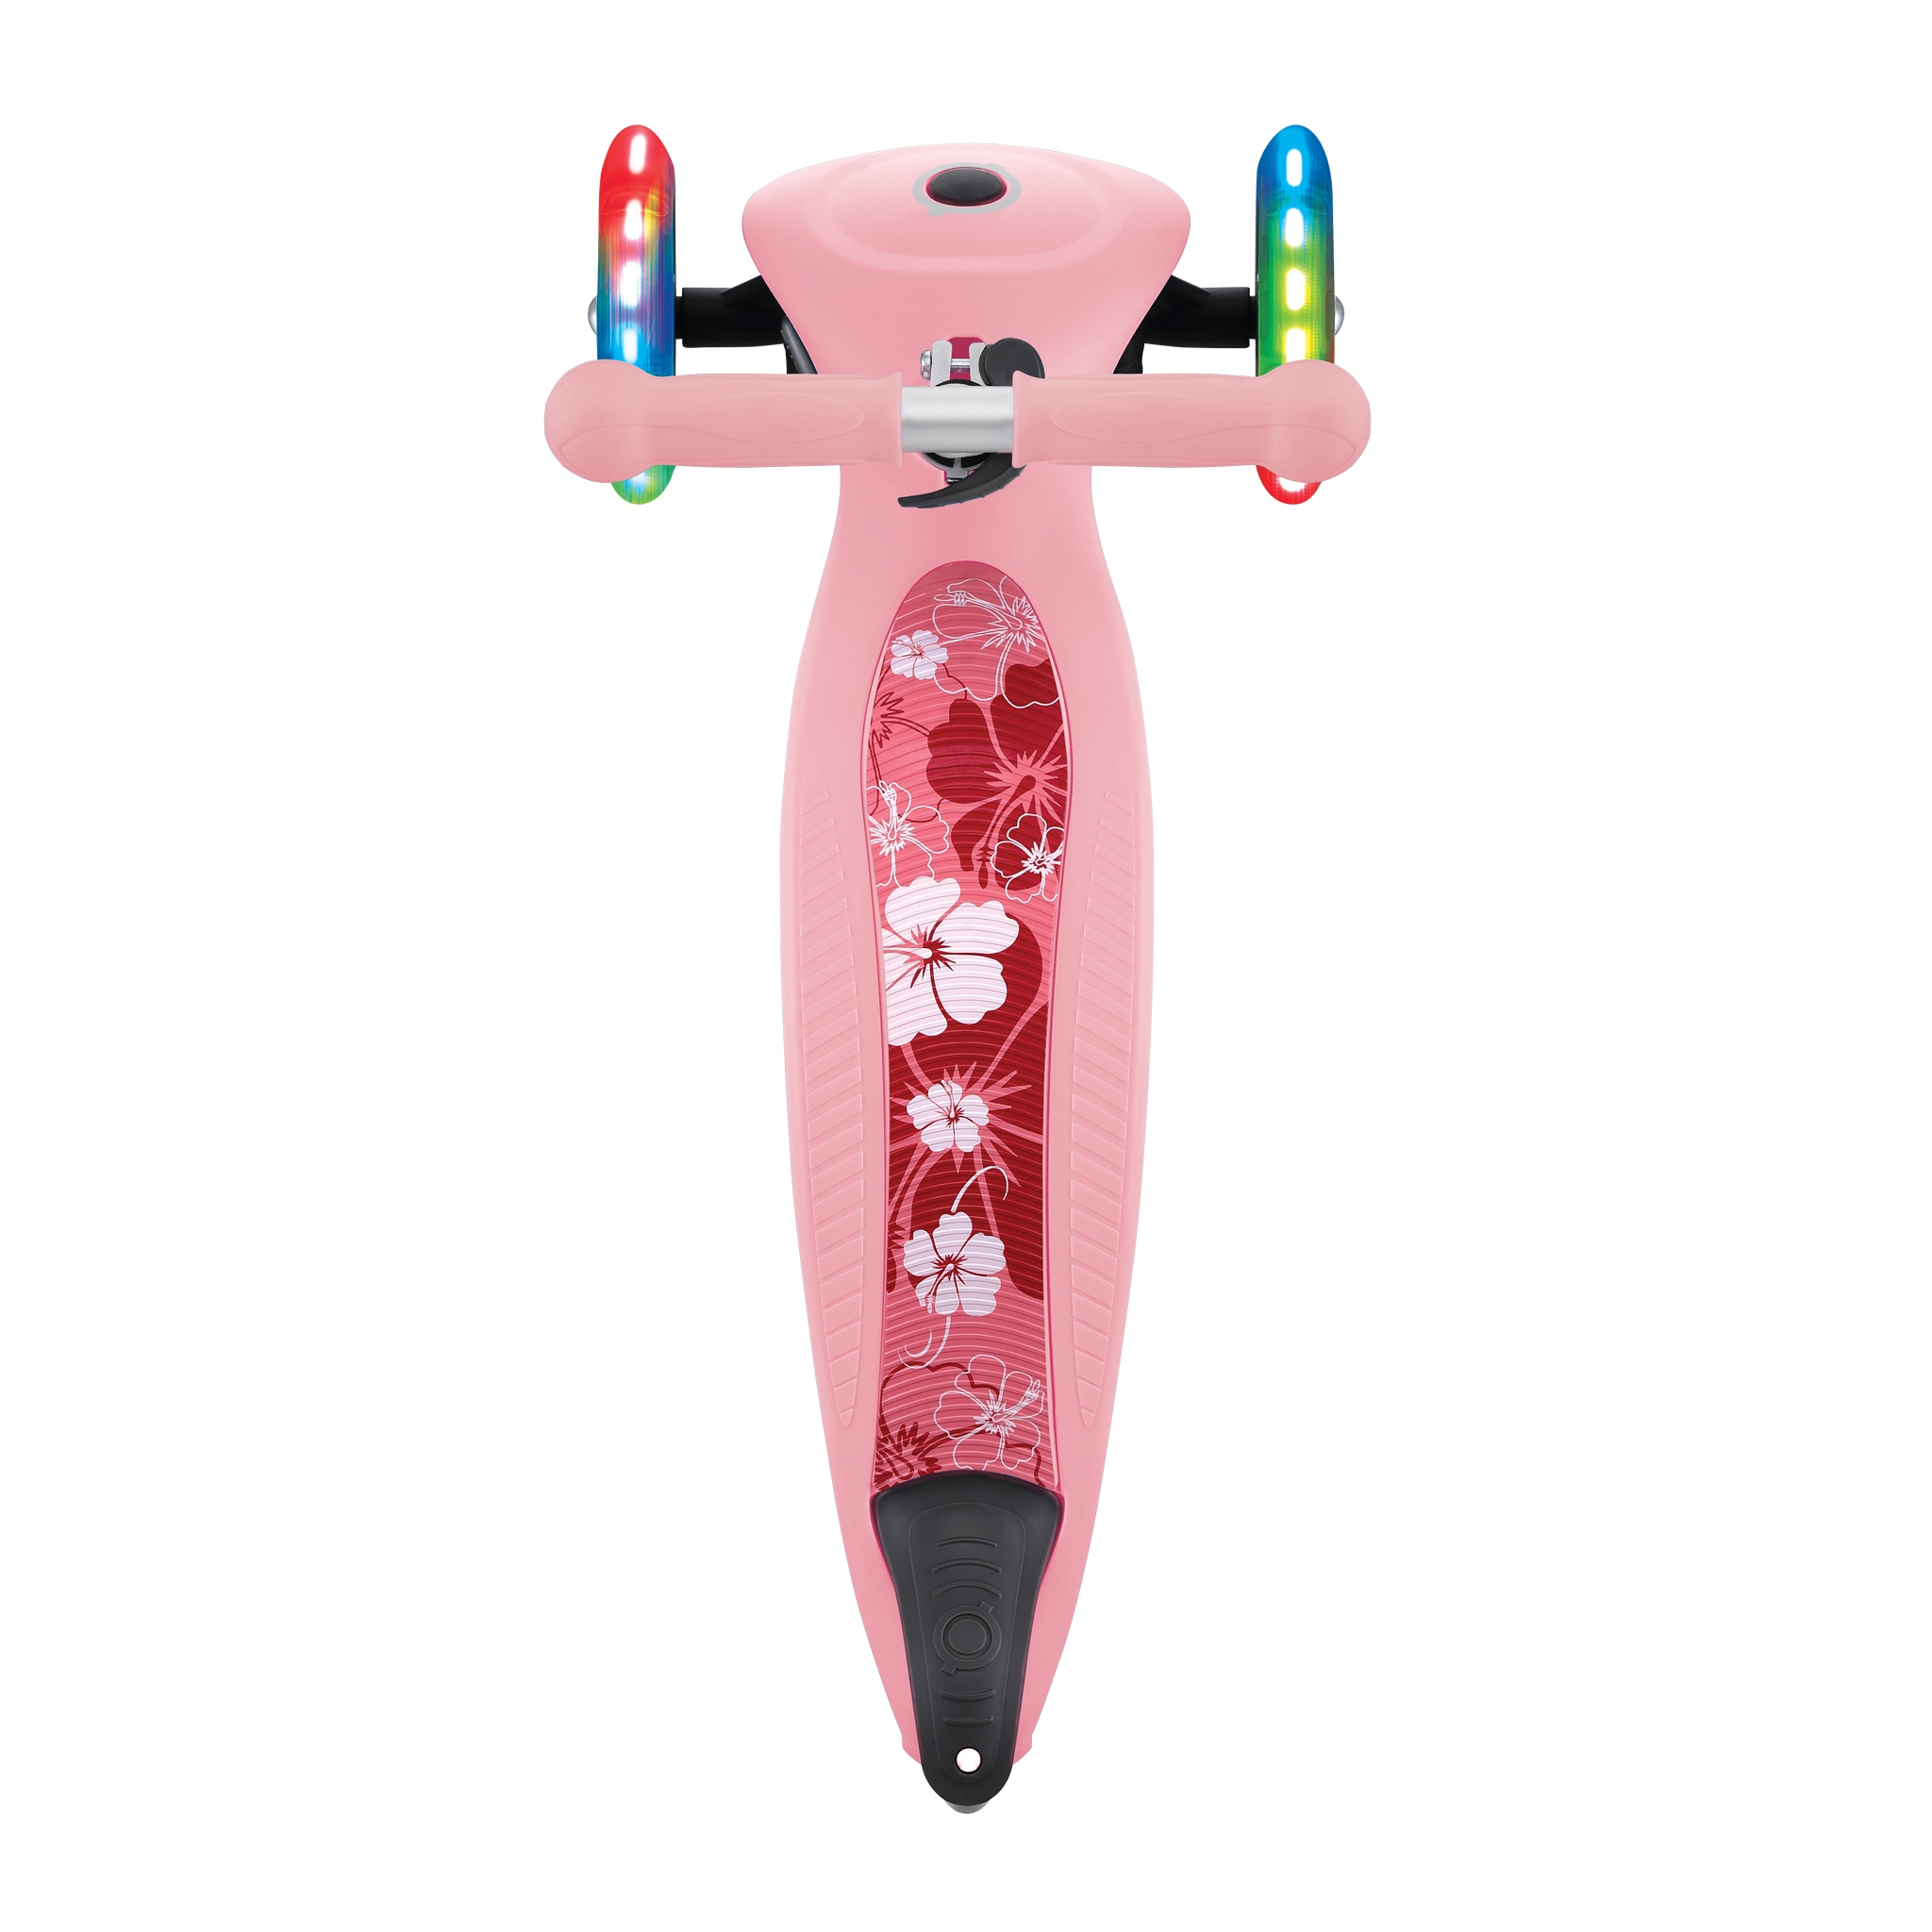 3-wheel-scooter-for-2-year-olds-with-fun-scooter-deck-pattern-Globber-JUNIOR-FOLDABLE-FANTASY-LIGHTS 2